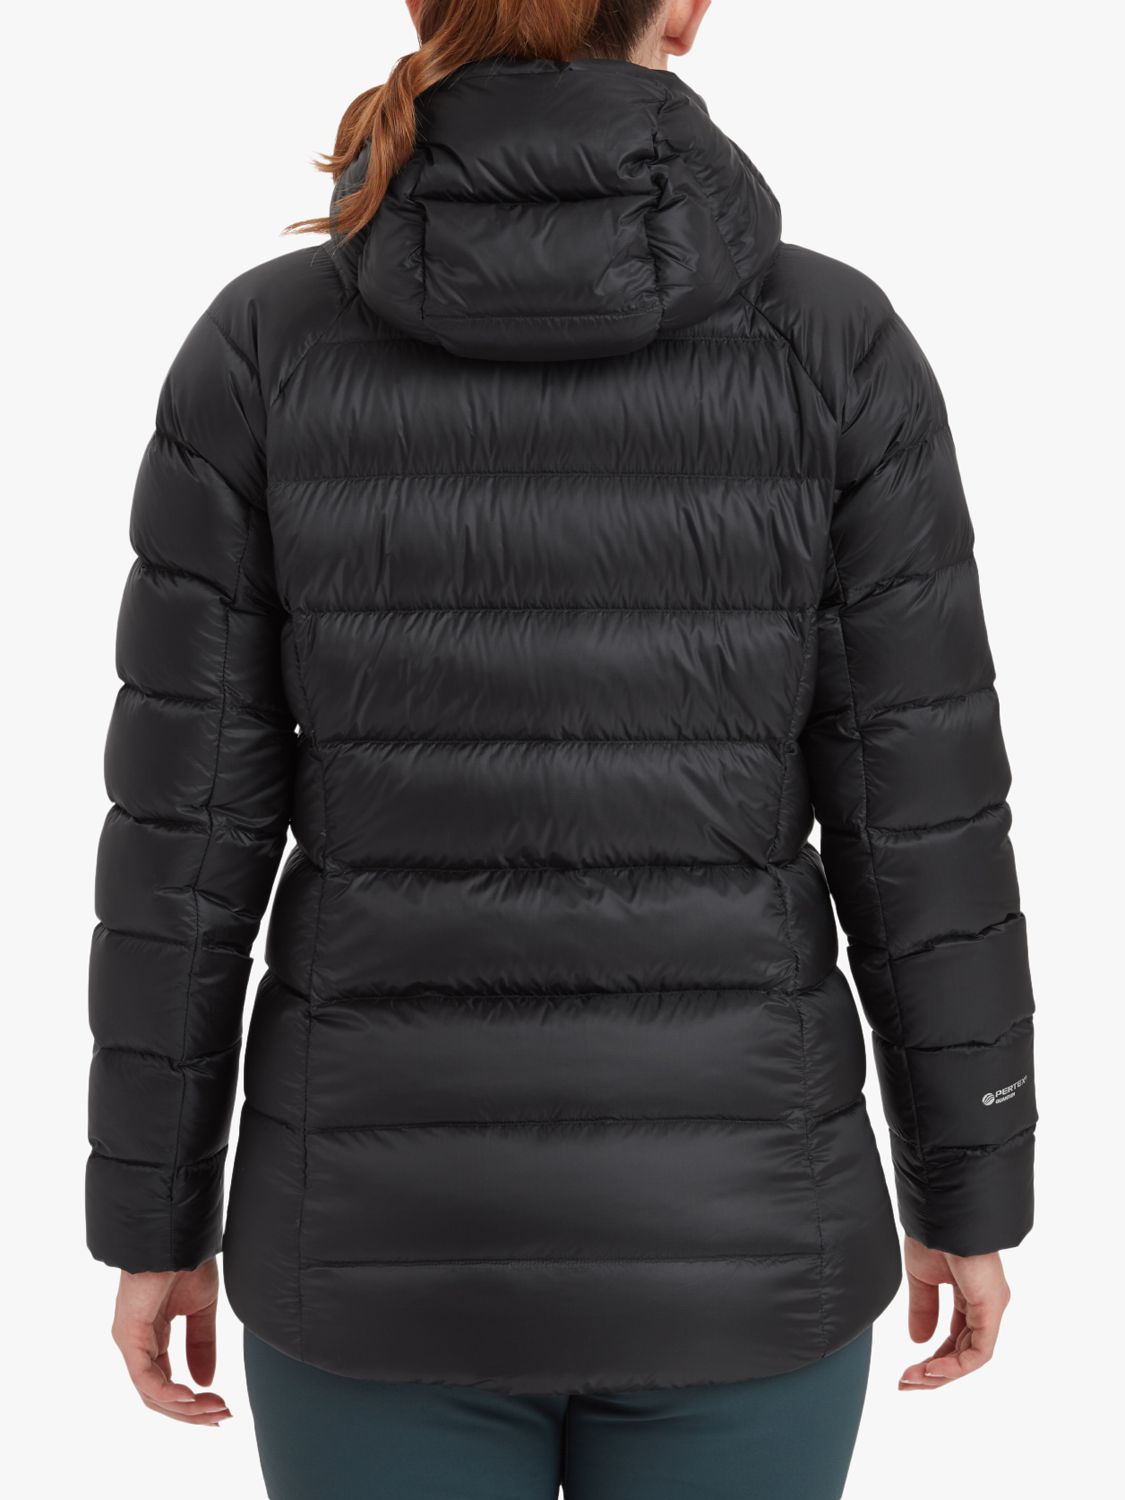 Buy Montane Anti-Freeze XT Women's Recycled Down Jacket Online at johnlewis.com